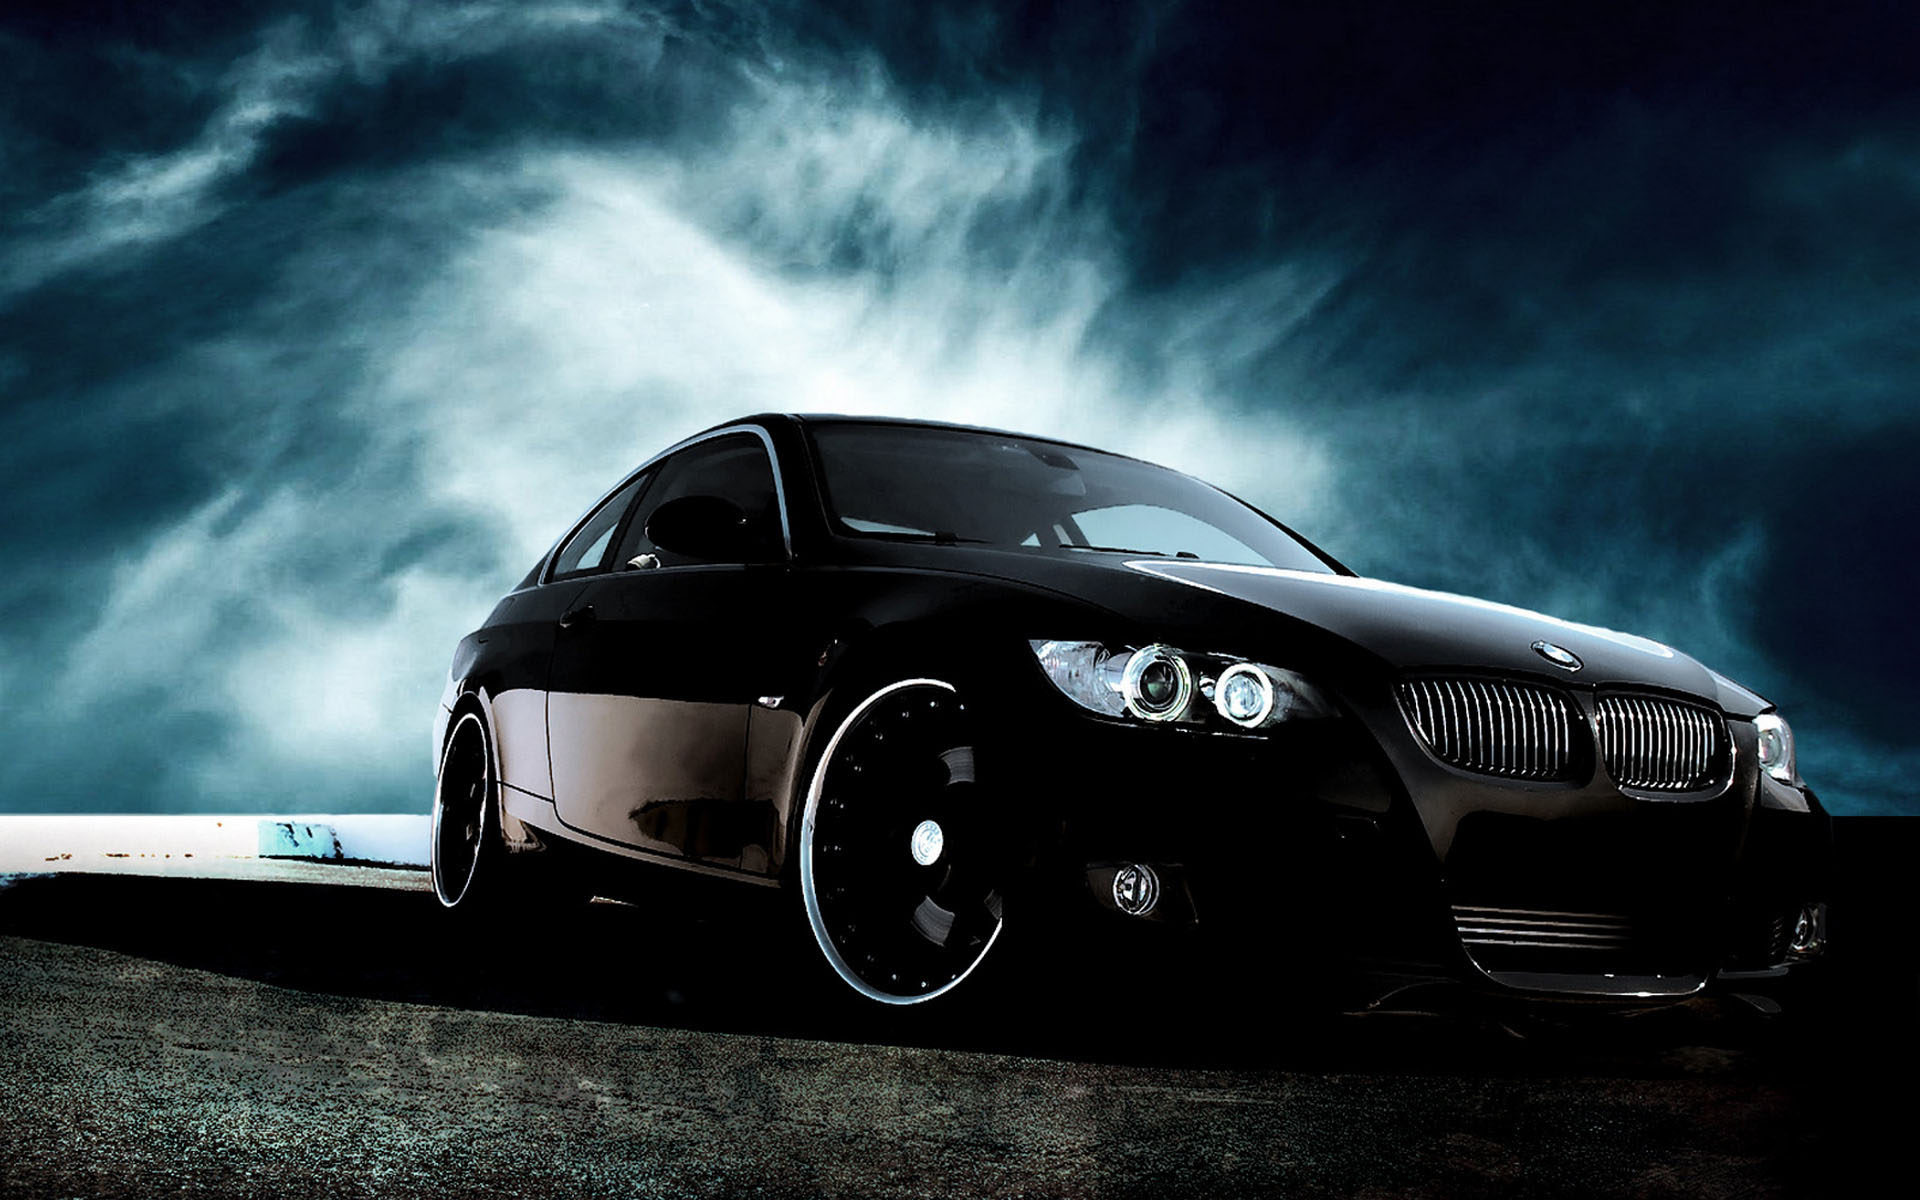 hd car wallpapers for pc,land vehicle,vehicle,car,personal luxury car,automotive design